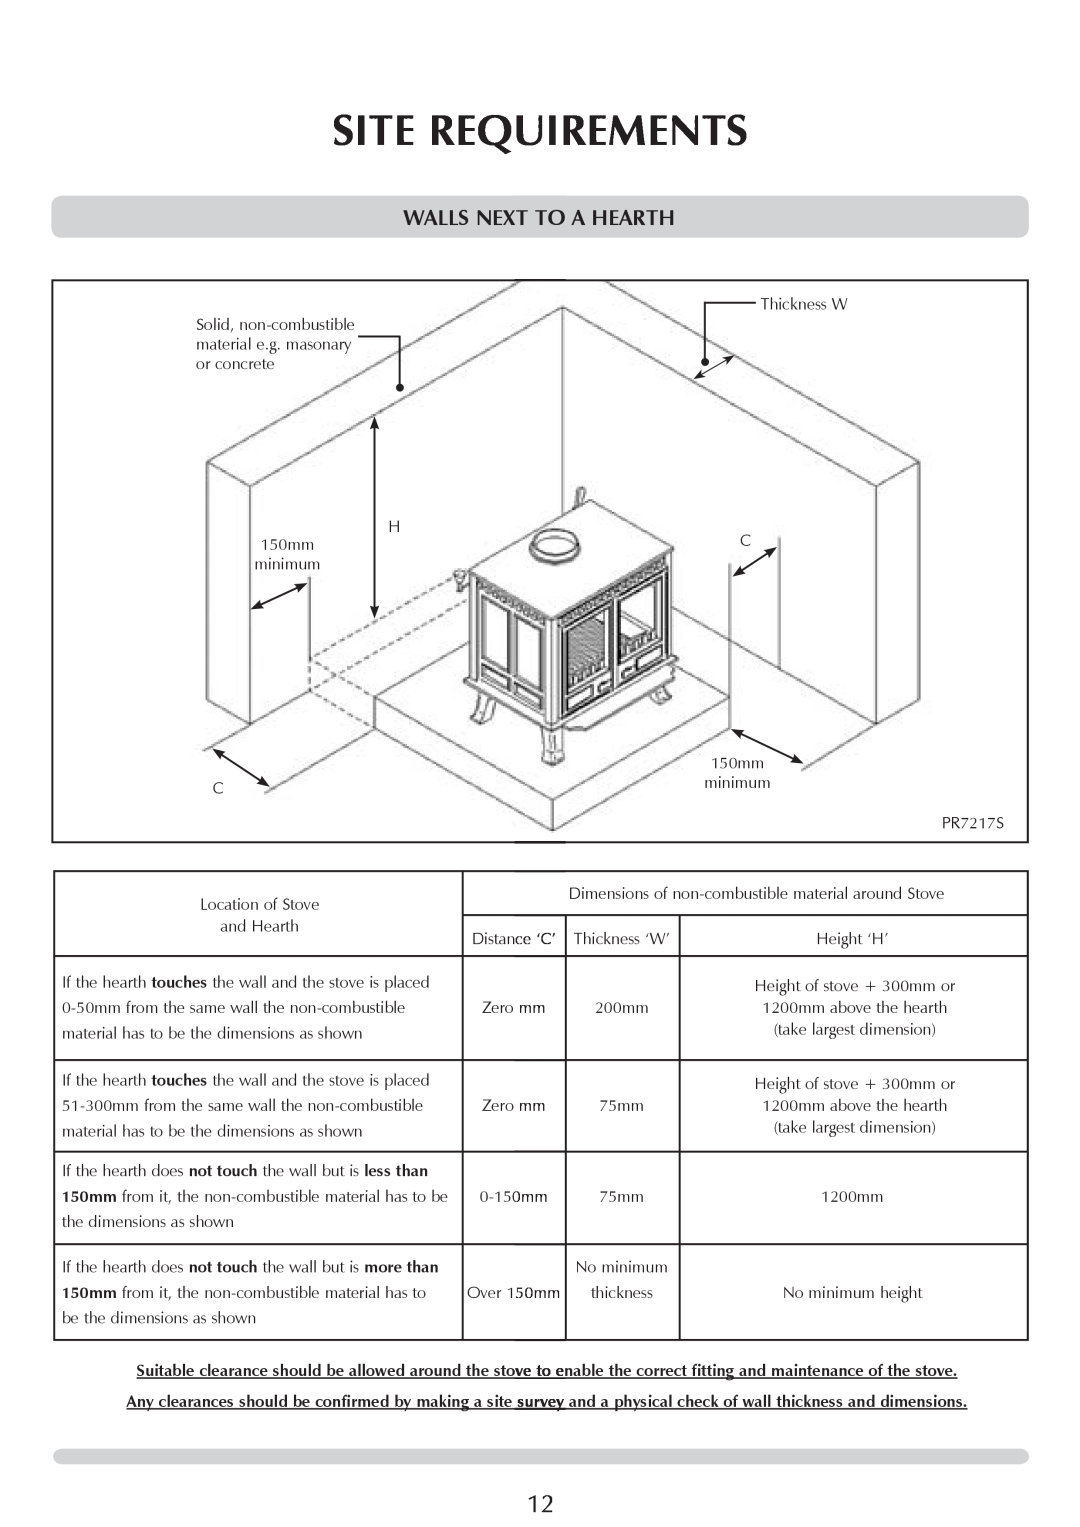 Stovax 7016, 7027, 7017, sheraton free standing stove manual Walls Next To A Hearth, Site Requirements 